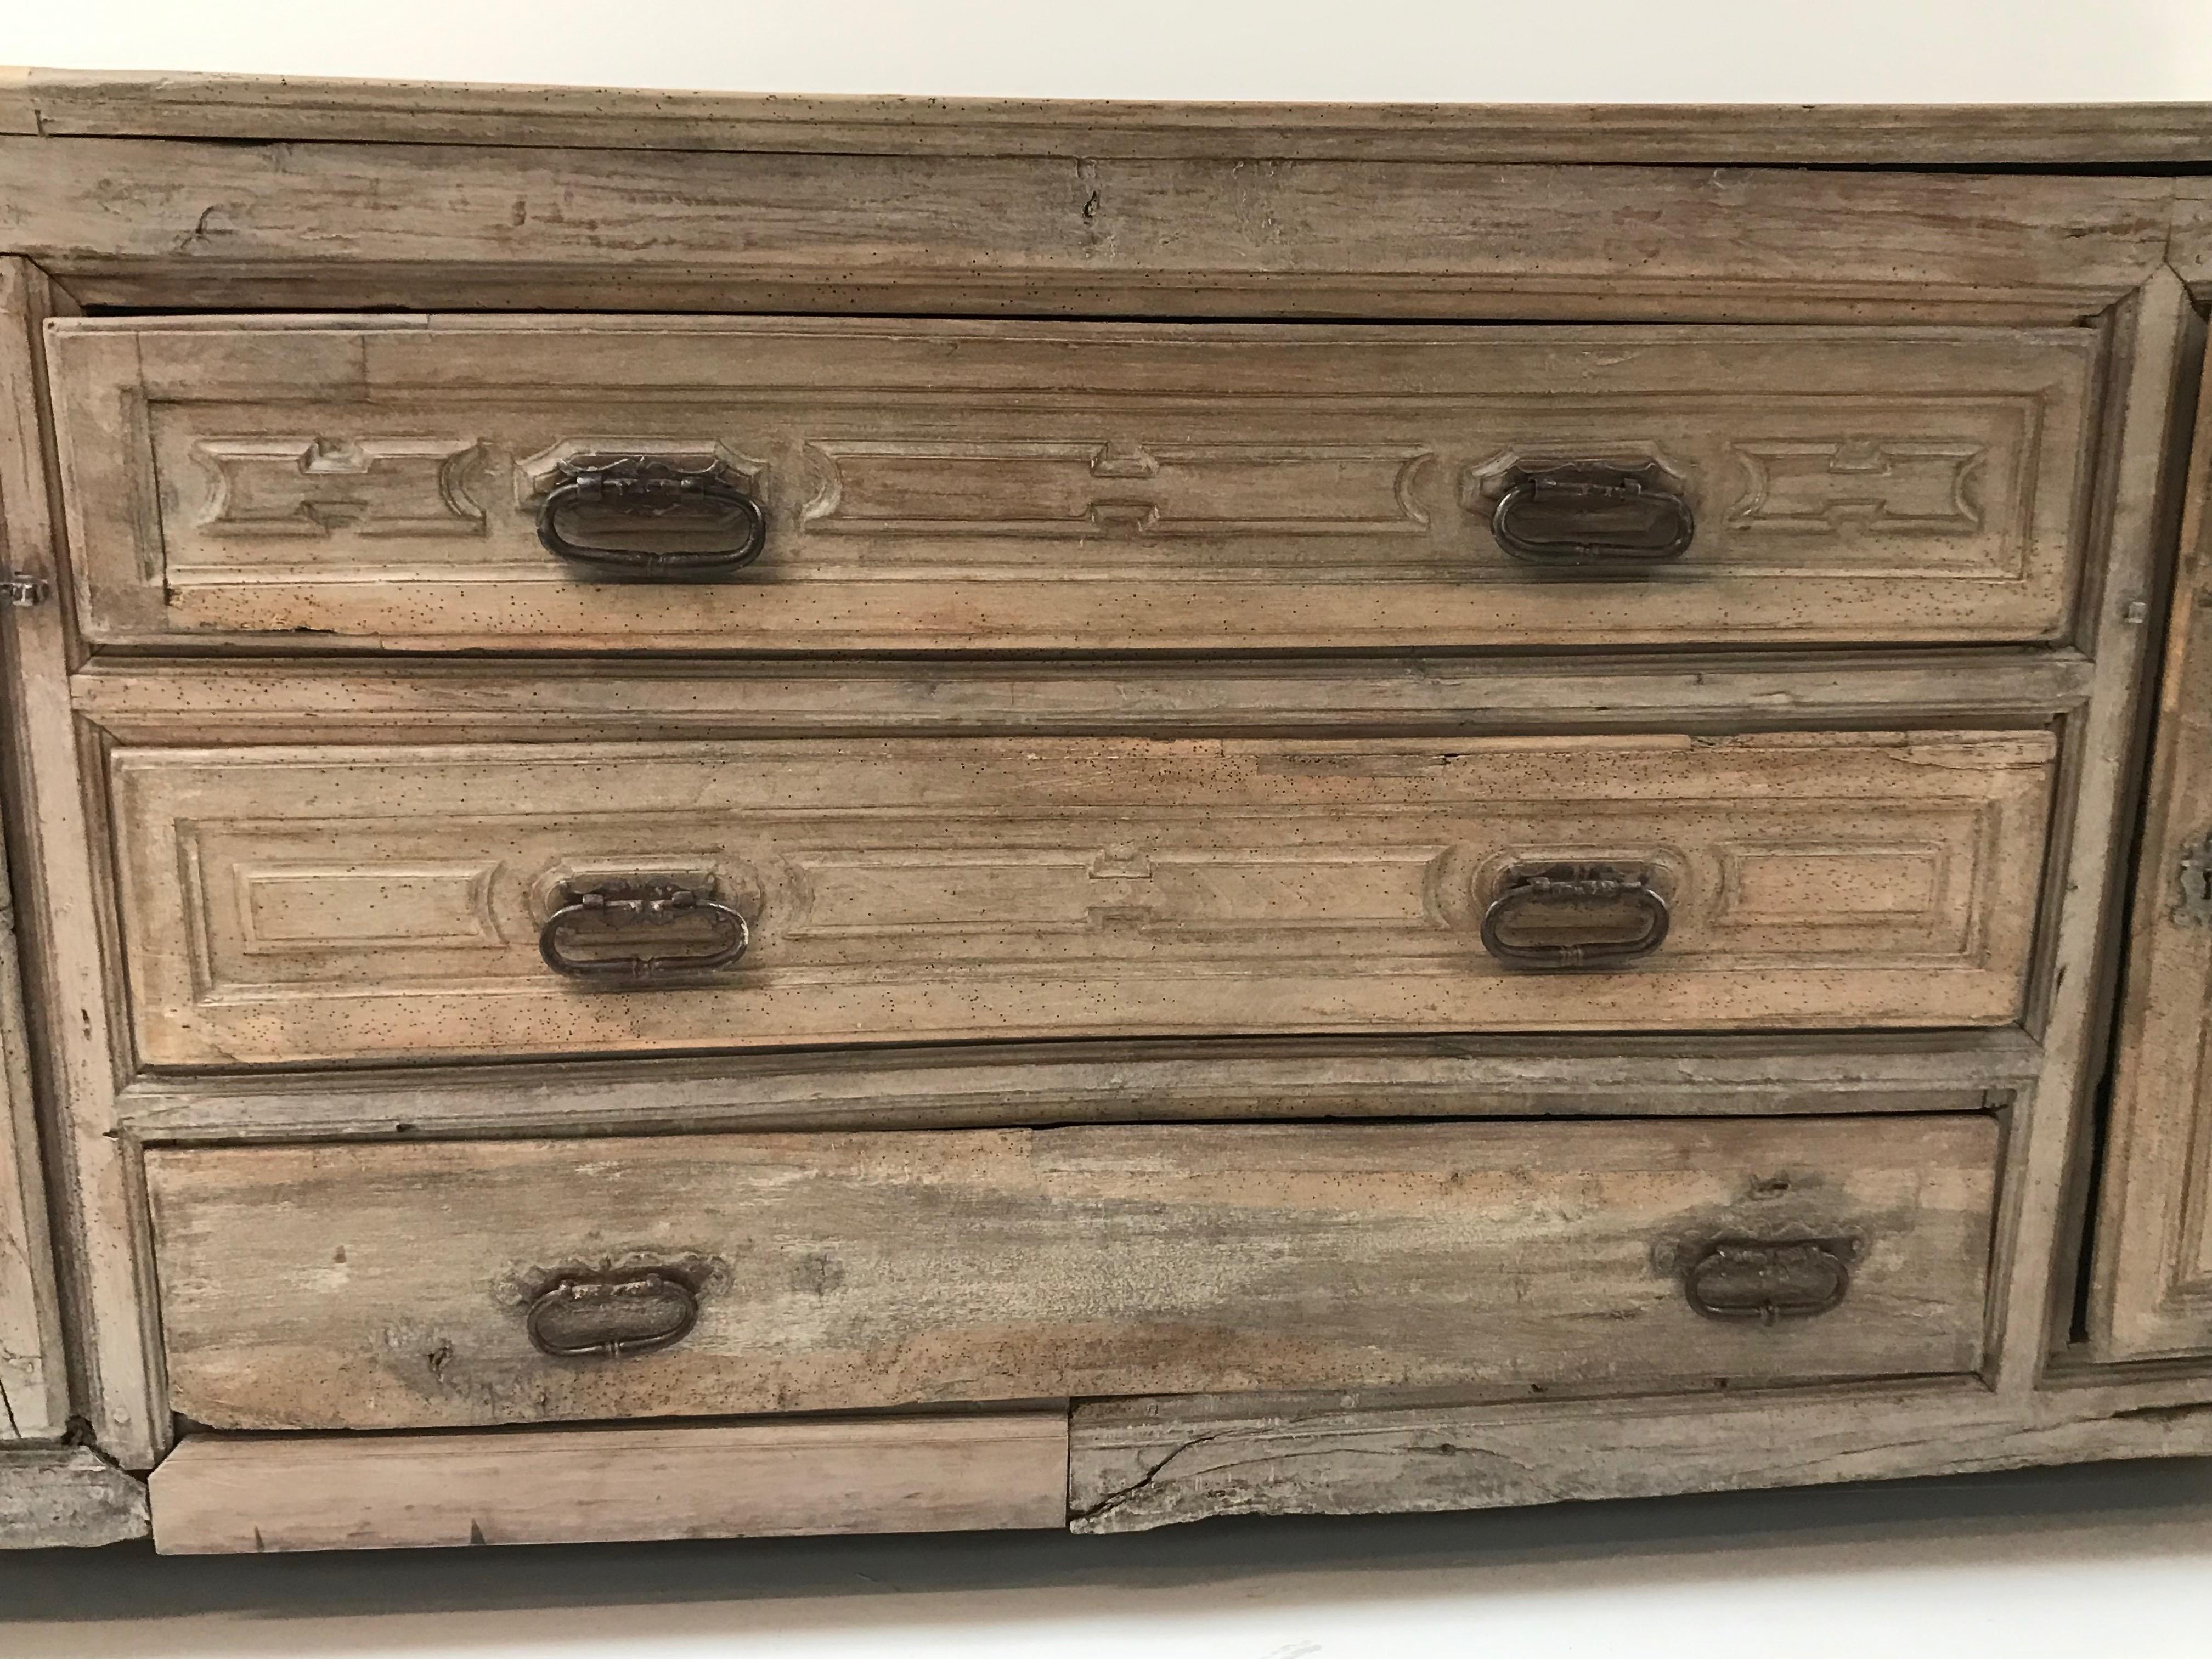 Exquisite Spanish Sacristy Chest, Early 17th Century 9